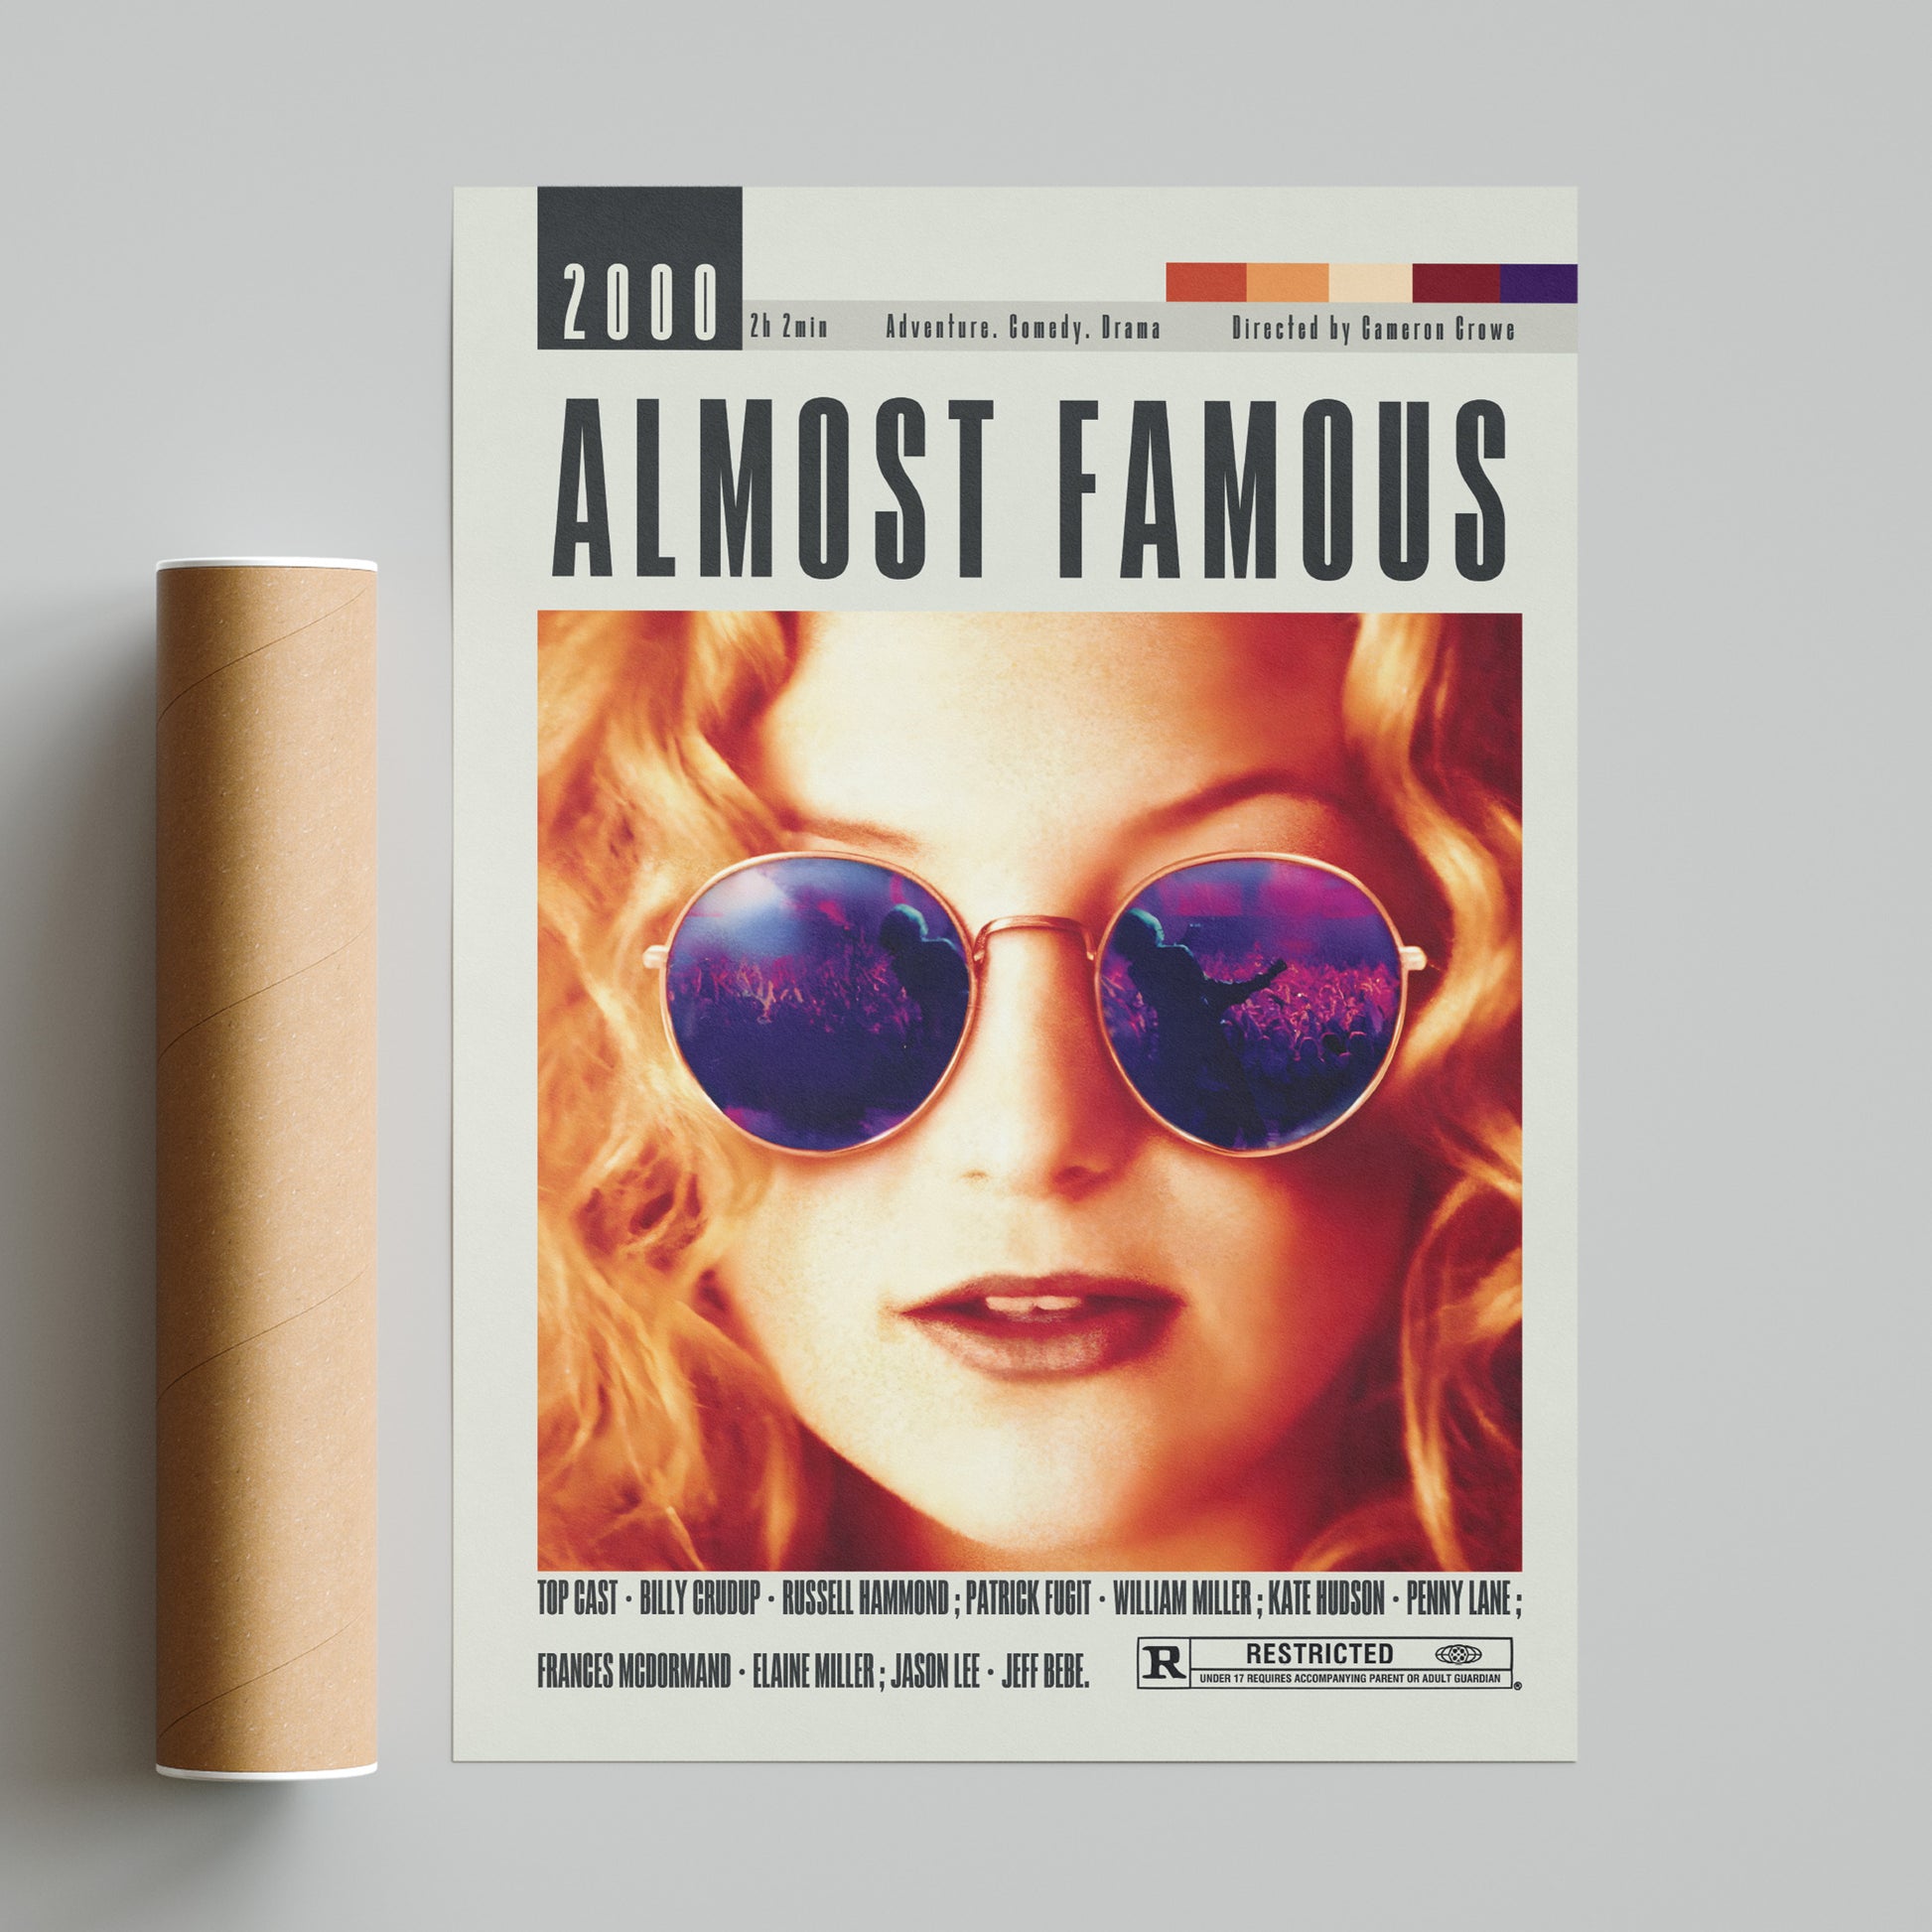 This Almost Famous Poster showcases 98 different movie posters from the best Cameron Crowe movies. From iconic scenes to top-notch casts, this vintage retro art print is sure to enhance your wall decor. Available in various sizes, it's the perfect minimalist movie poster for any fan or movie buff.